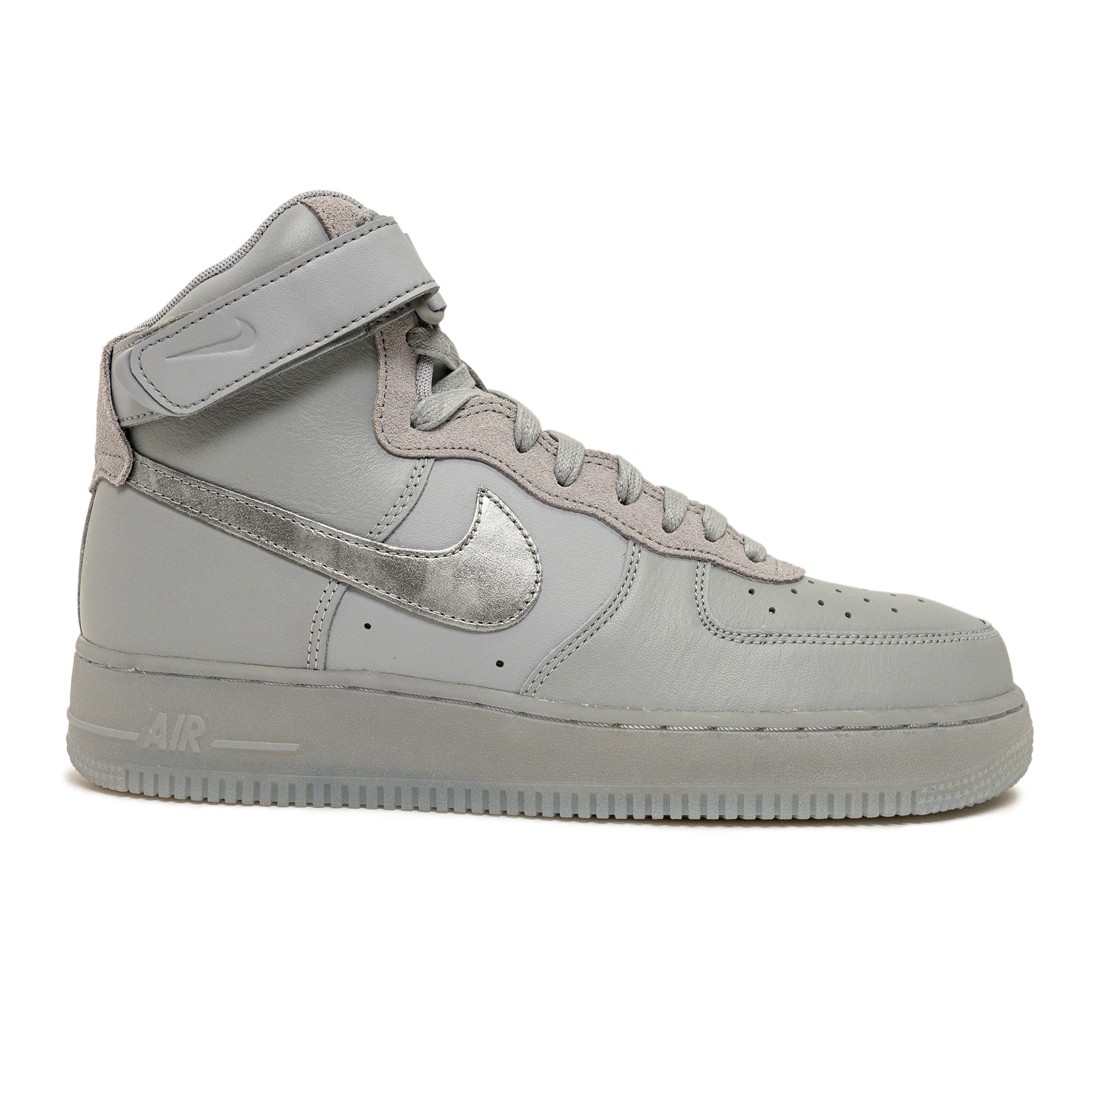 In the mercy of Furious beneficial nike men air force 1 high '07 prm wolf grey metallic silver volt